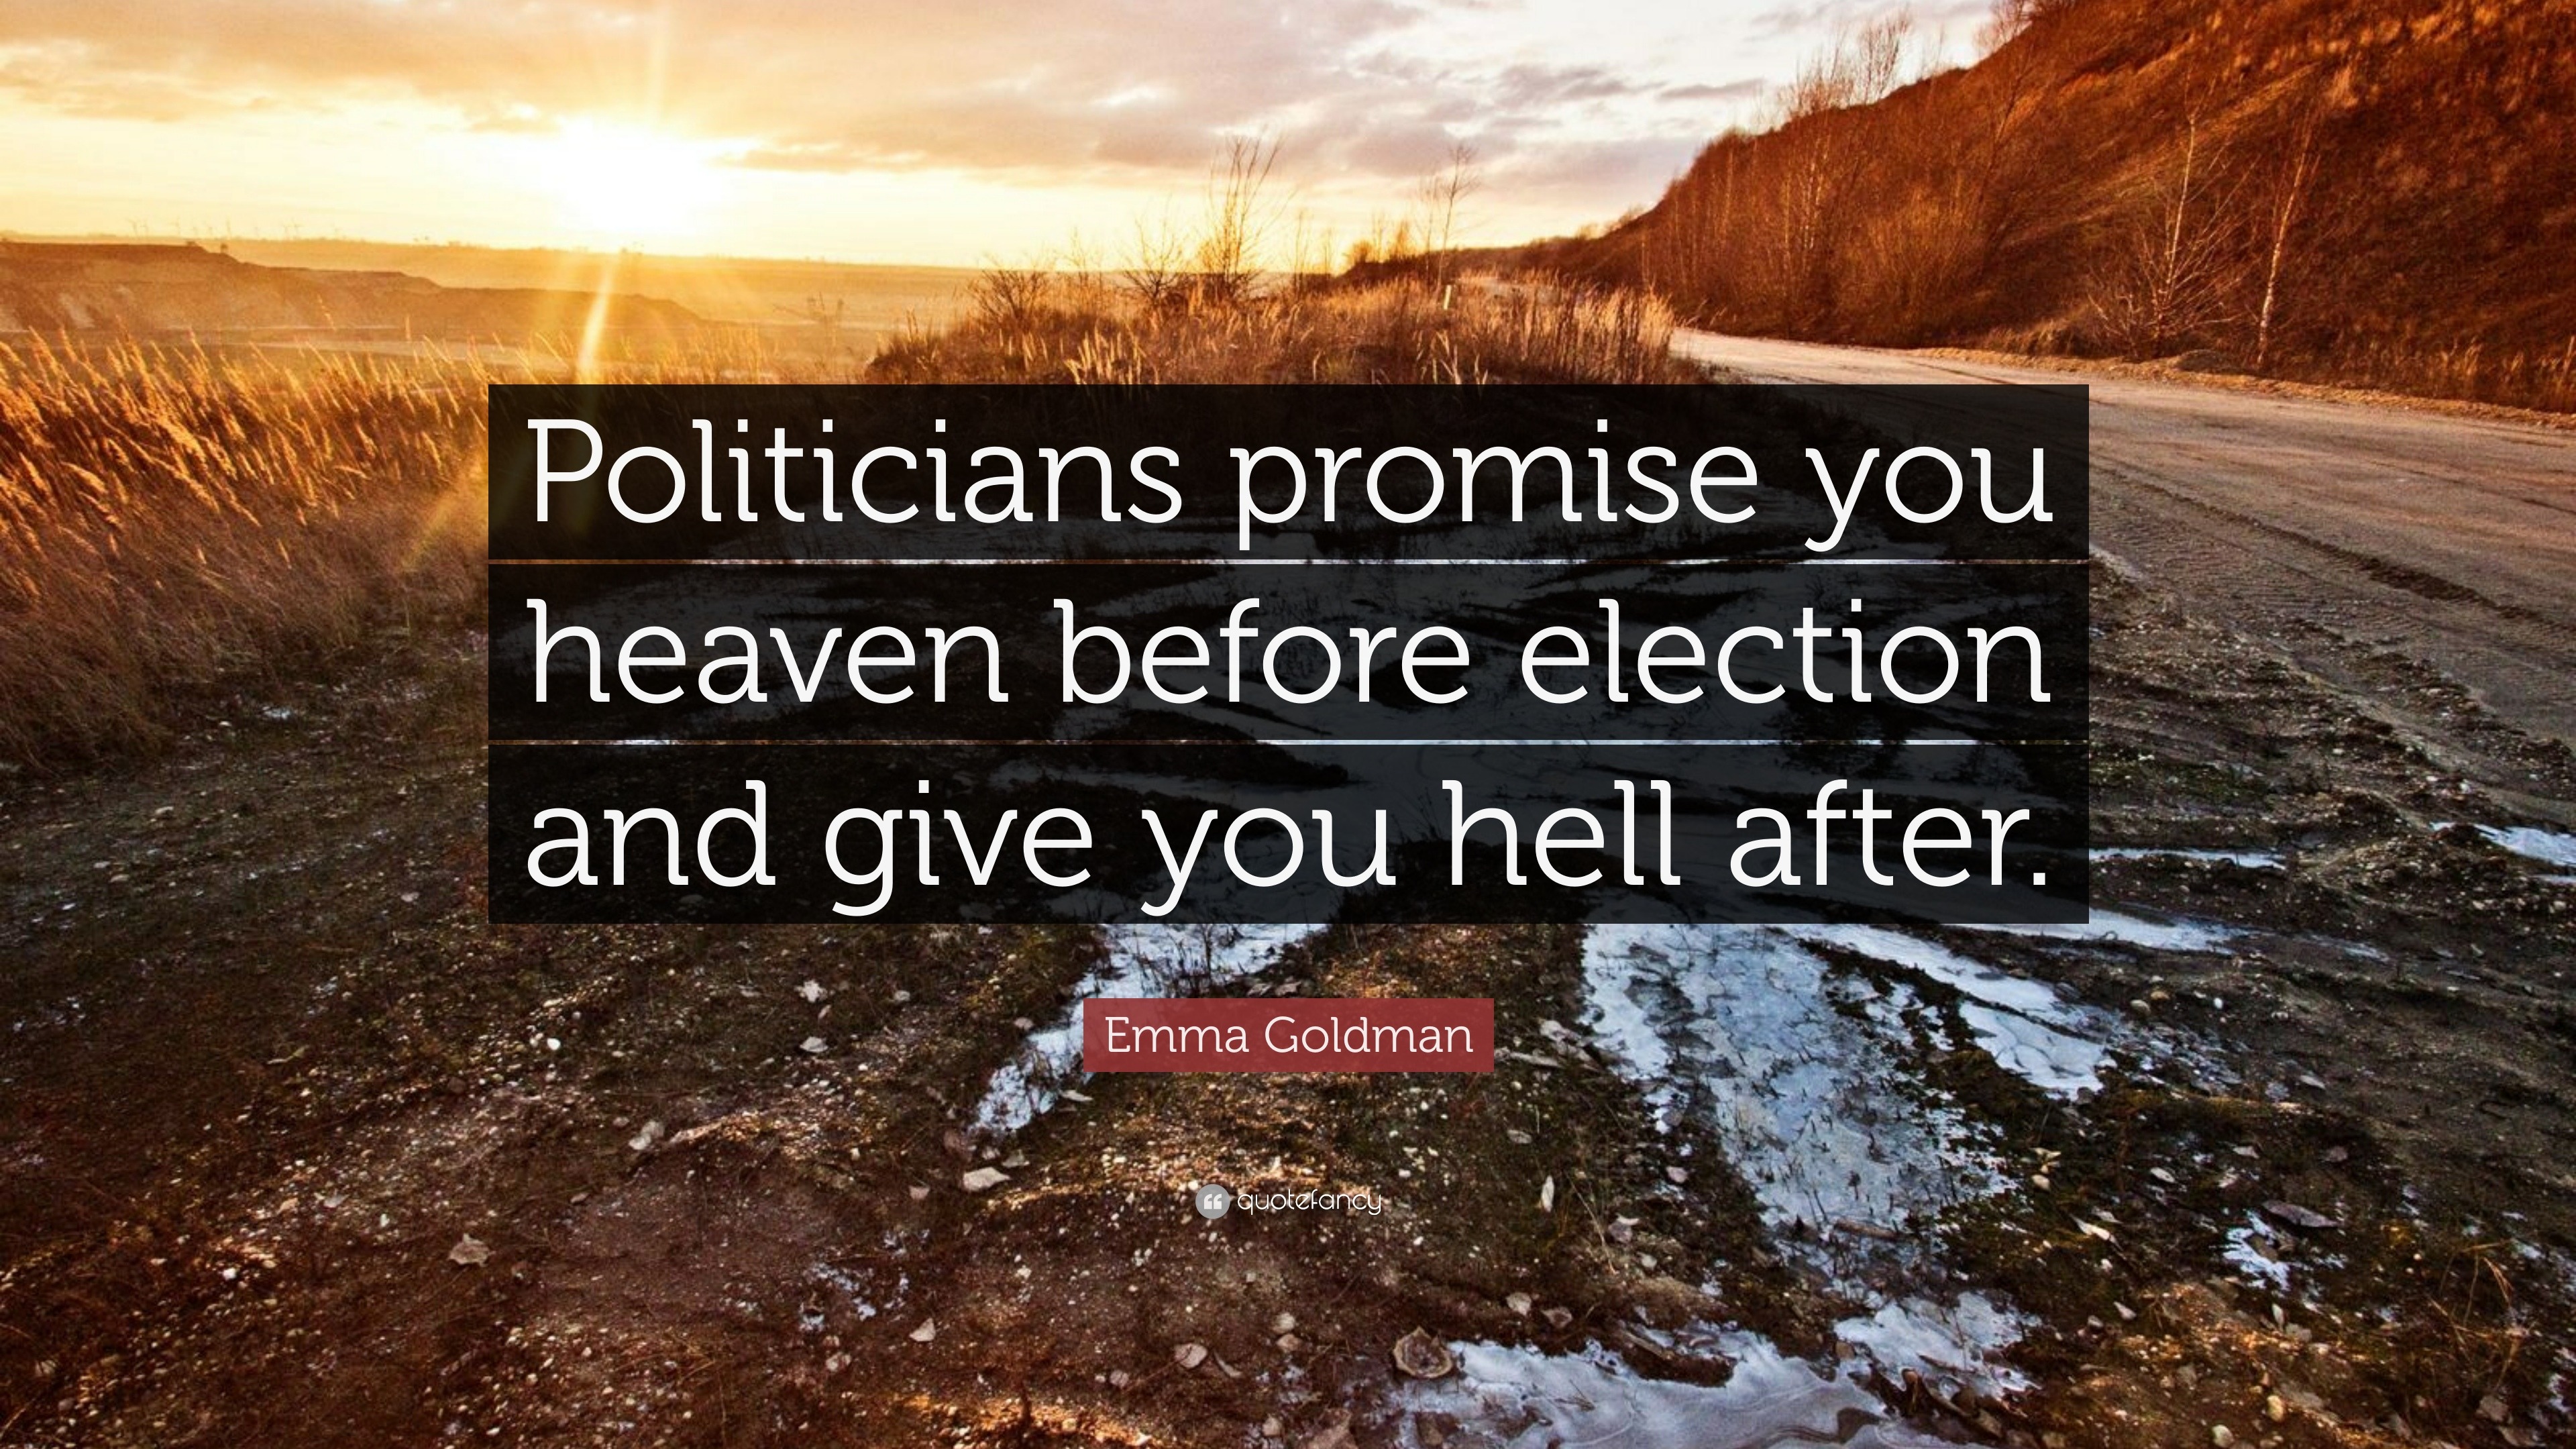 Emma Goldman Quote: “Politicians promise you heaven before election and